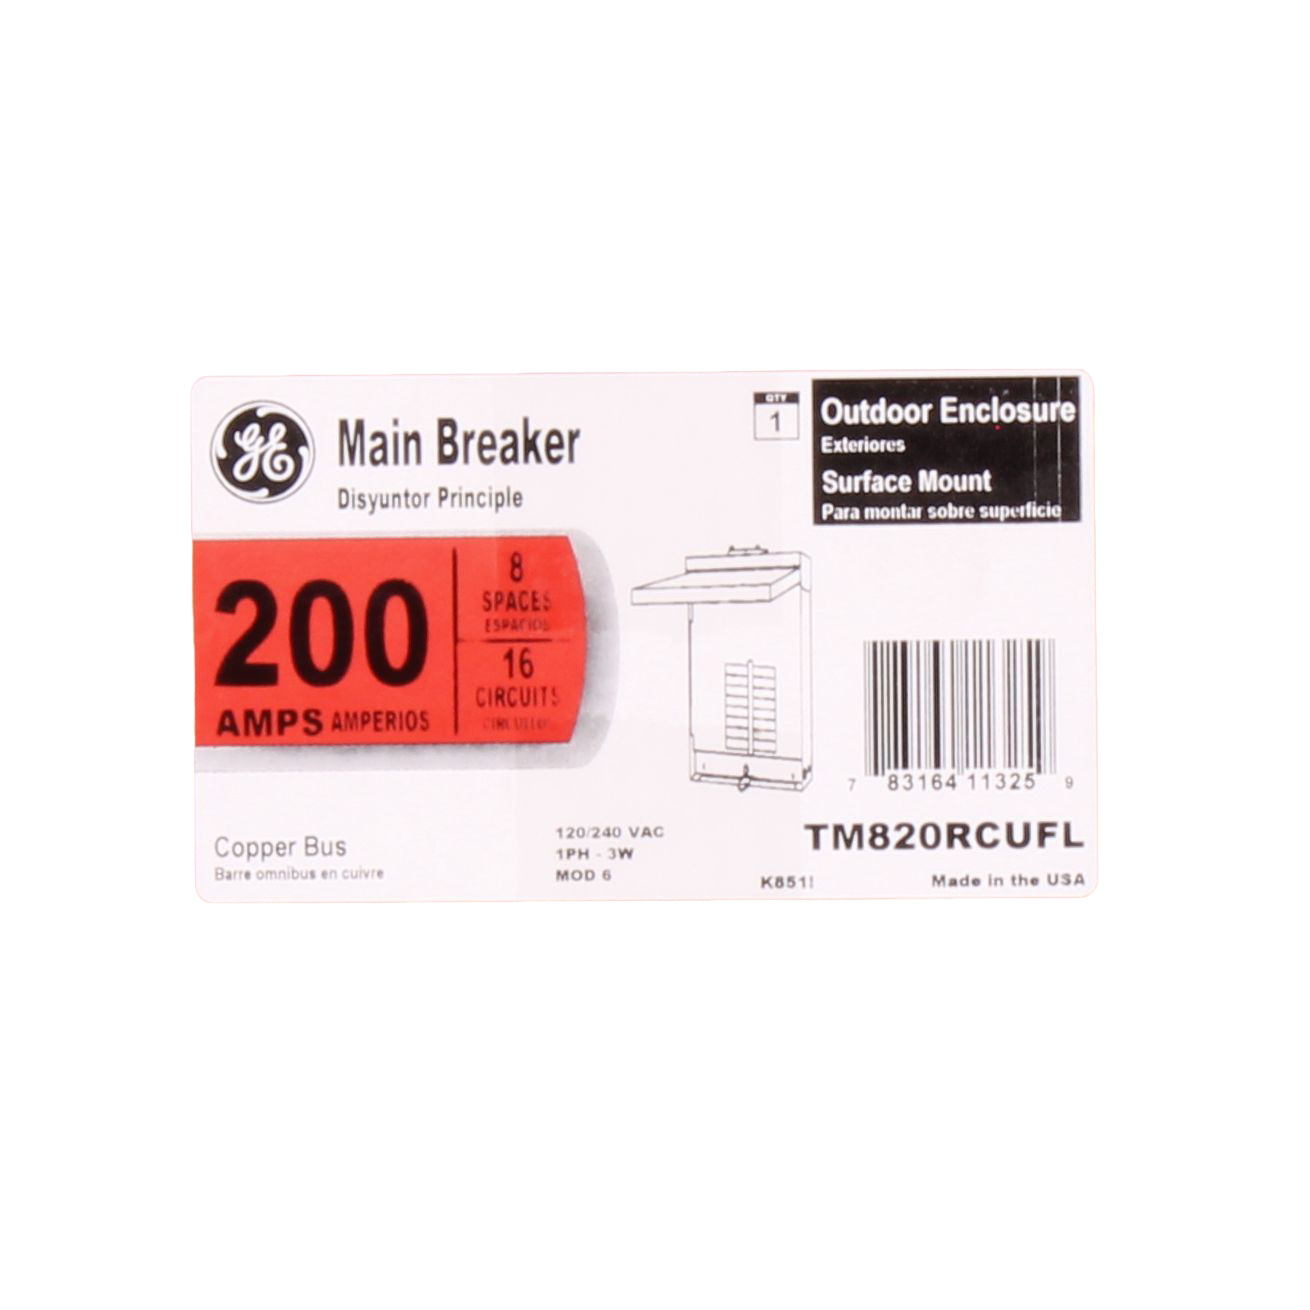 GEE TM820RCUFL 200A 3R 8 SPACE 22K IC MAIN BREAKER W/ FEED THRU LUGS AT BOTTOM RATED 200A 12-1/2W 28-11/16H 4-5/8D